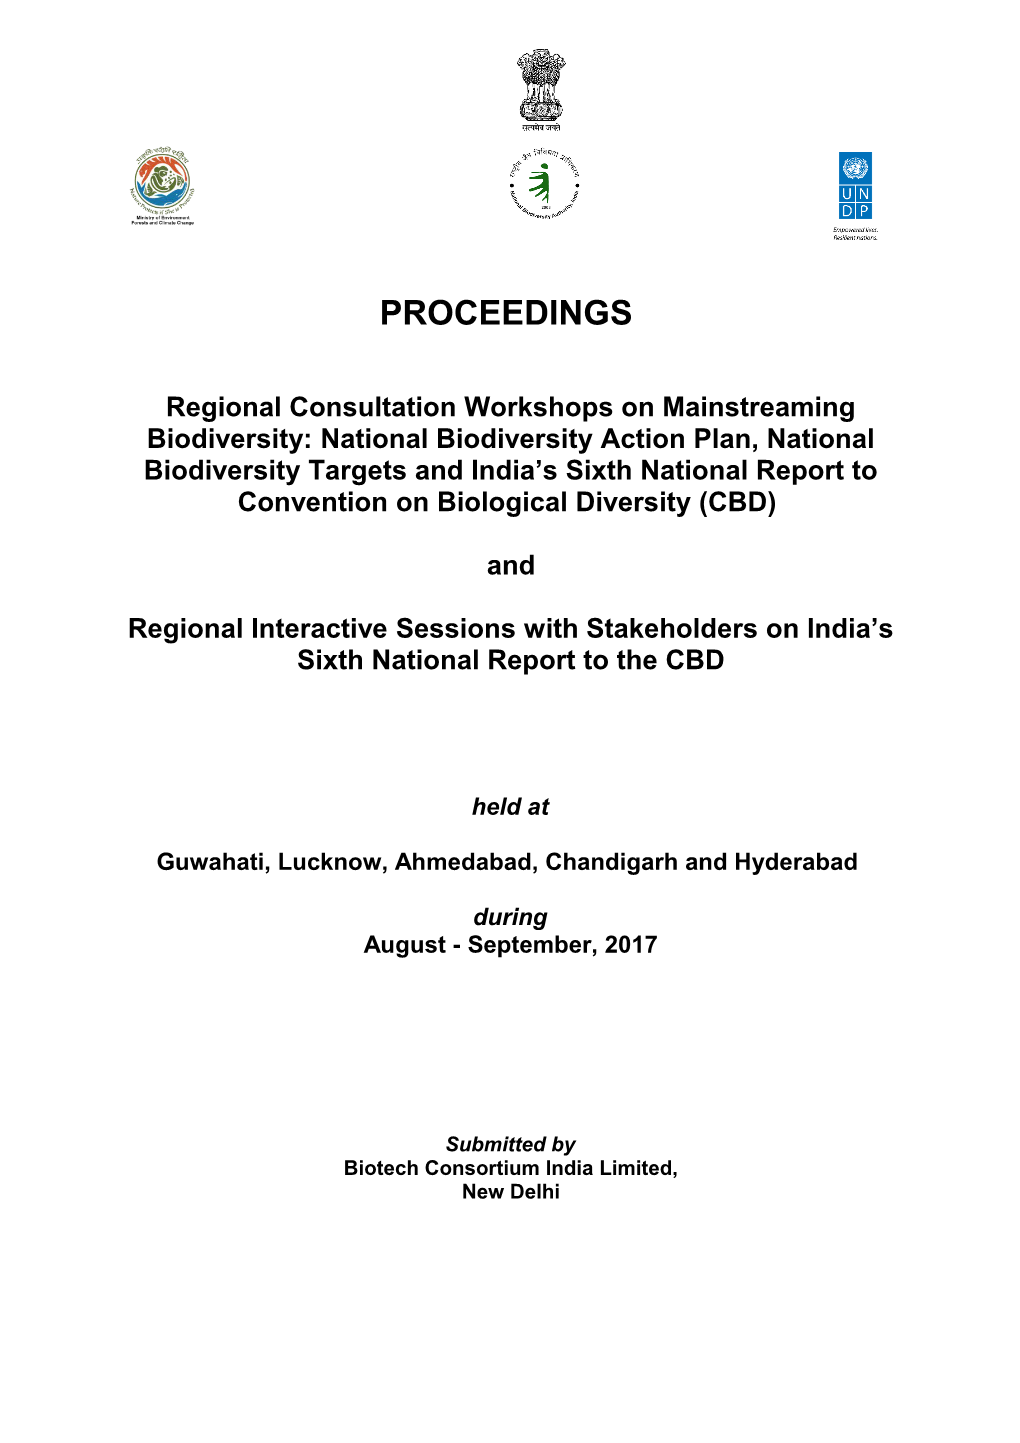 Regional Interactive Sessions with Stakeholders on India S Sixth National Report to the CBD